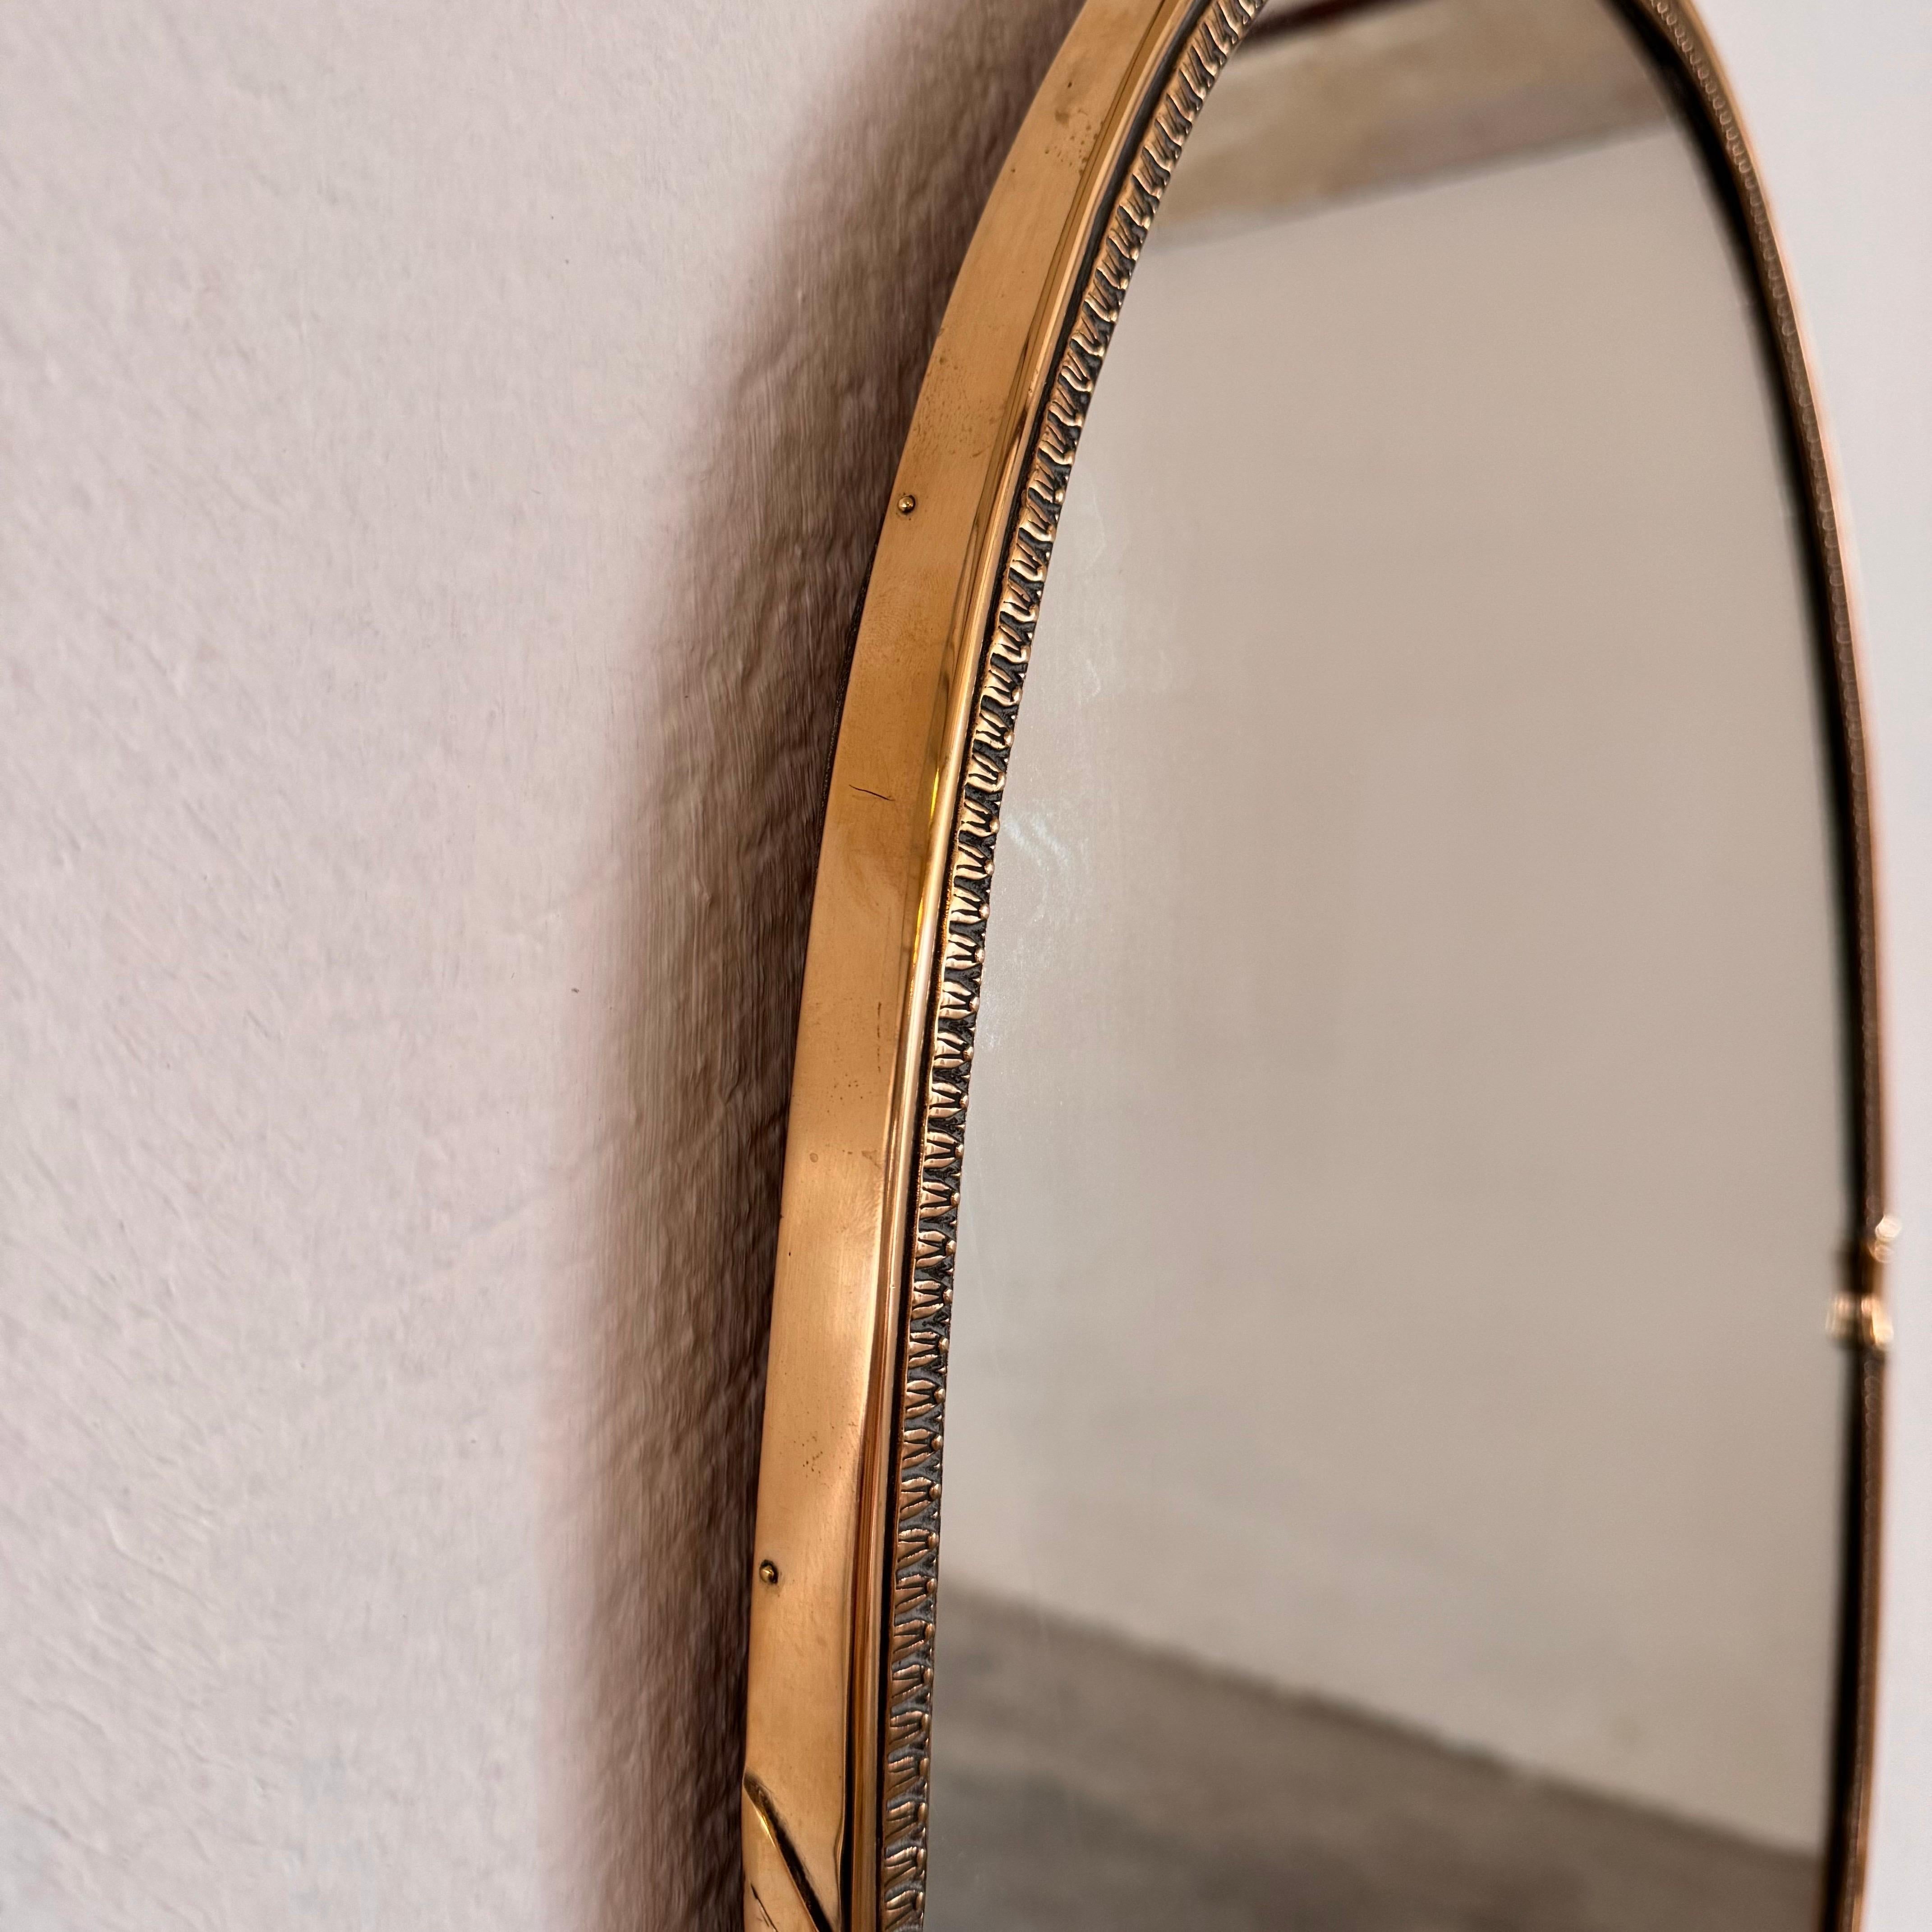 Exquisite 1950s Italian Brass Mirror in the Style of Gio Ponti For Sale 6